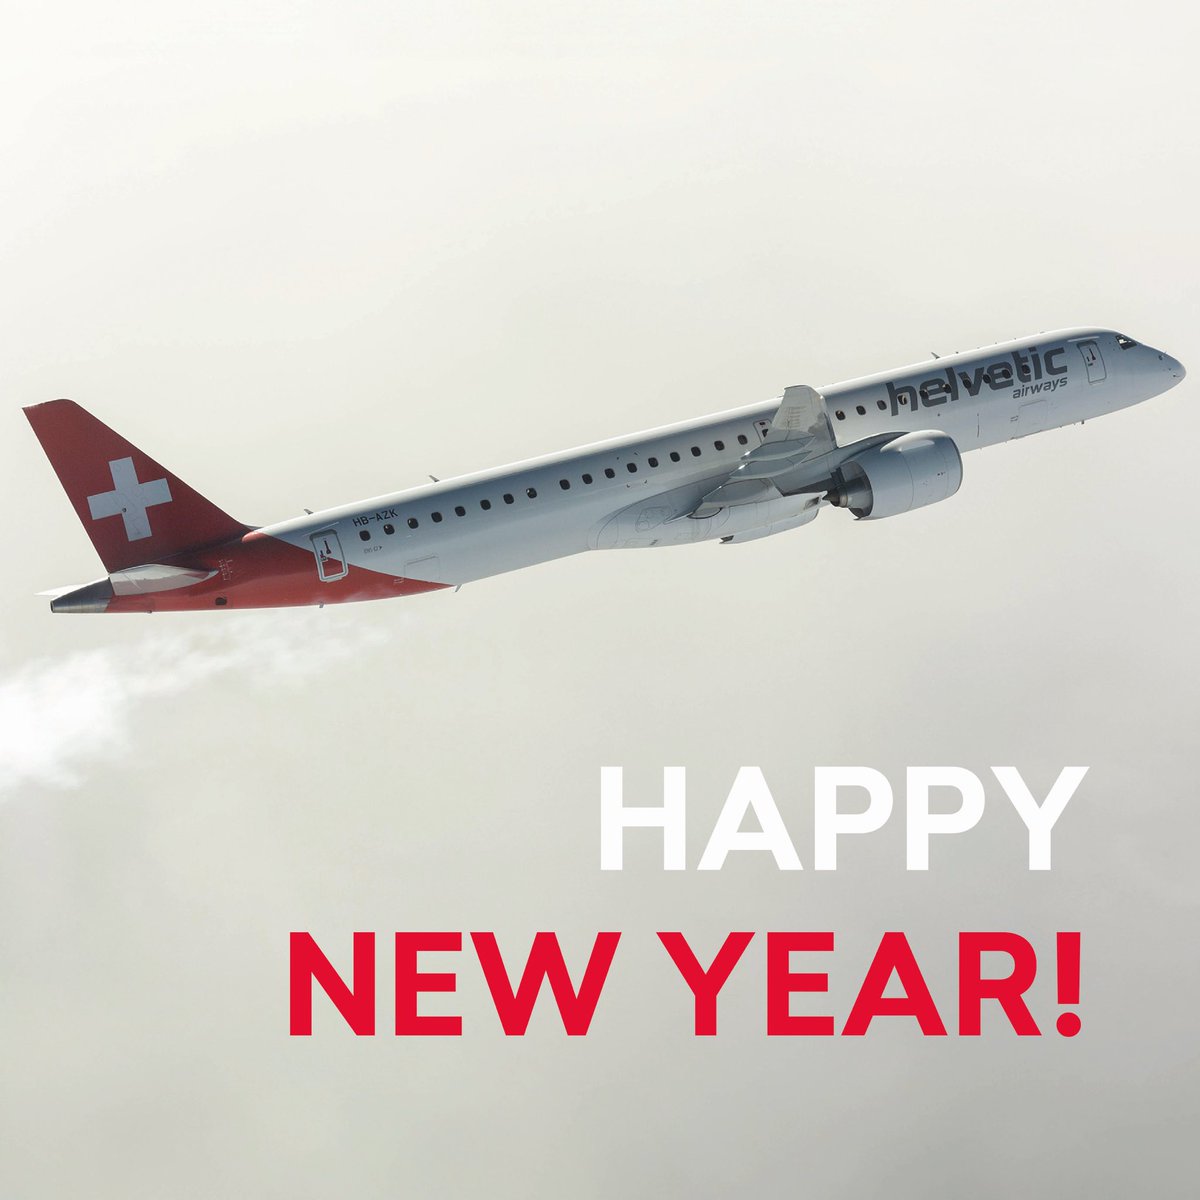 🎉 Helvetic wishes everyone a fulfilling and fantastic New Year!✨ Make the year 100% yours and let all your goals and dreams take flight as you embark on new adventures and challenges, filling your backpack with unforgettable moments. ✈ . . . 📸© VBS-DDPS, Maj Donat Achermann